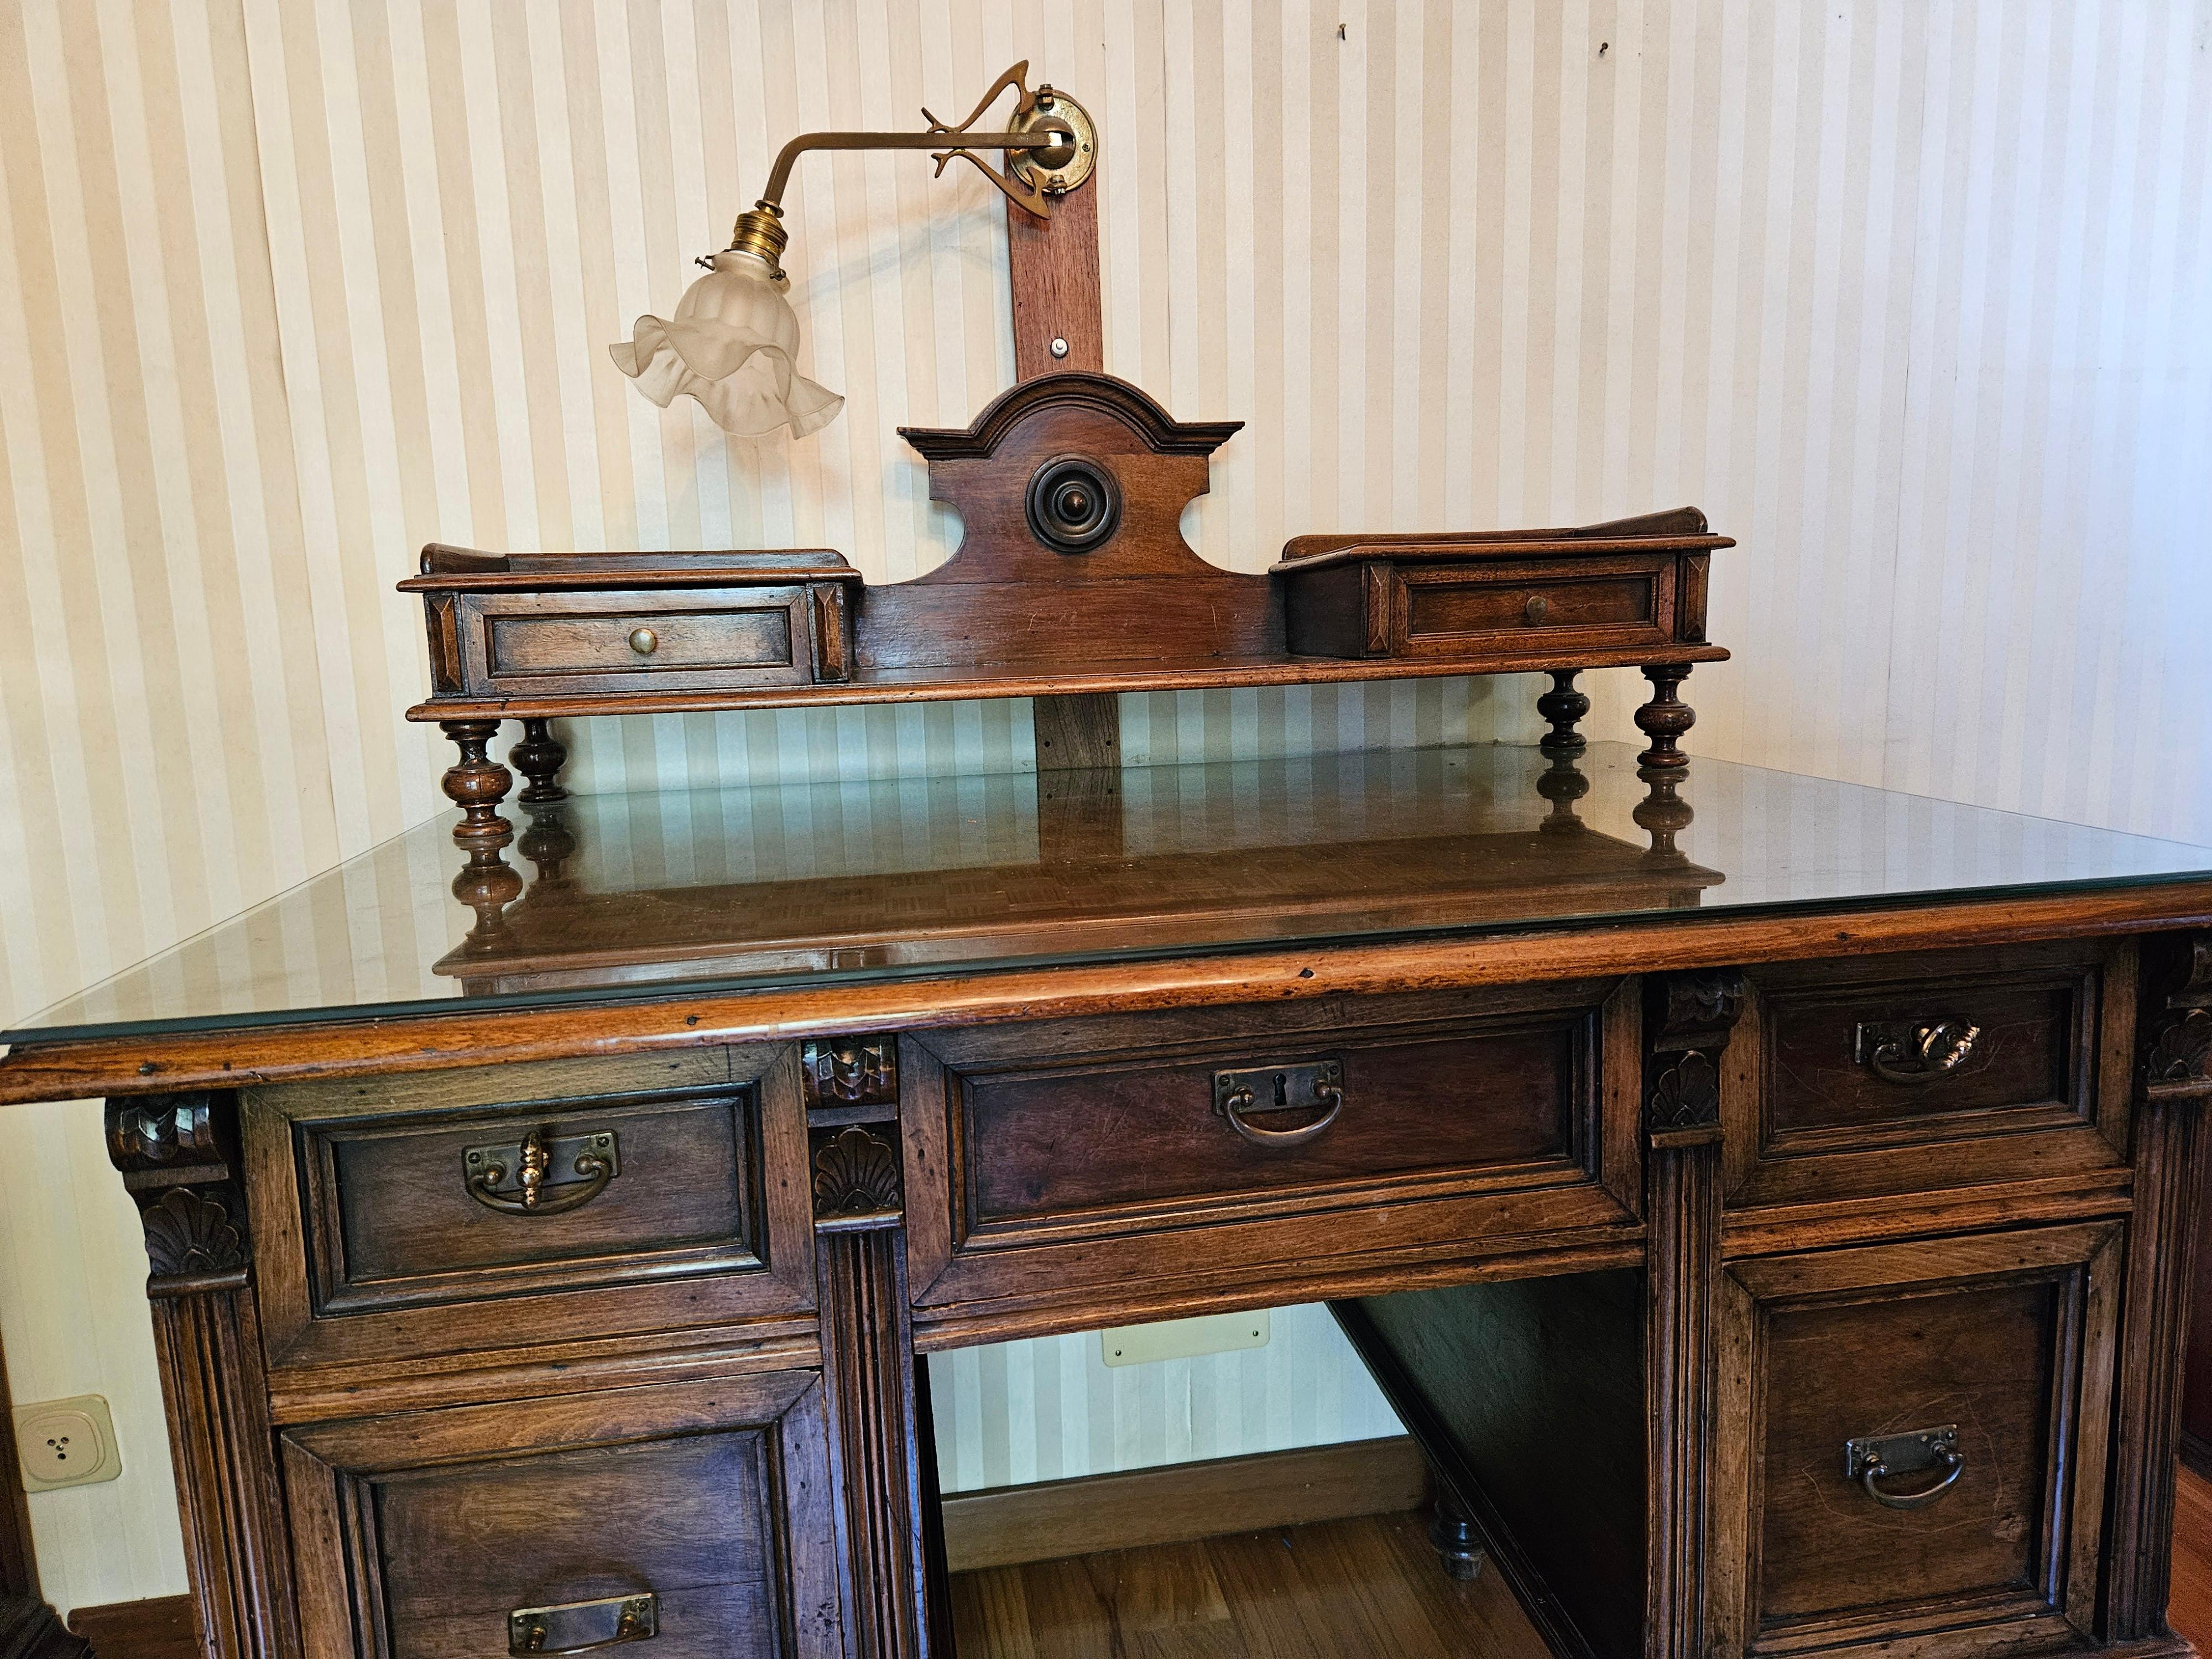 Venetian walnut writing desk with an ornate glass-protected top and a set of large, sturdy drawers.

On the main top we find two side drawers with a two-way glass light, down a pair of drawers on the right and left plus a central one.

Various